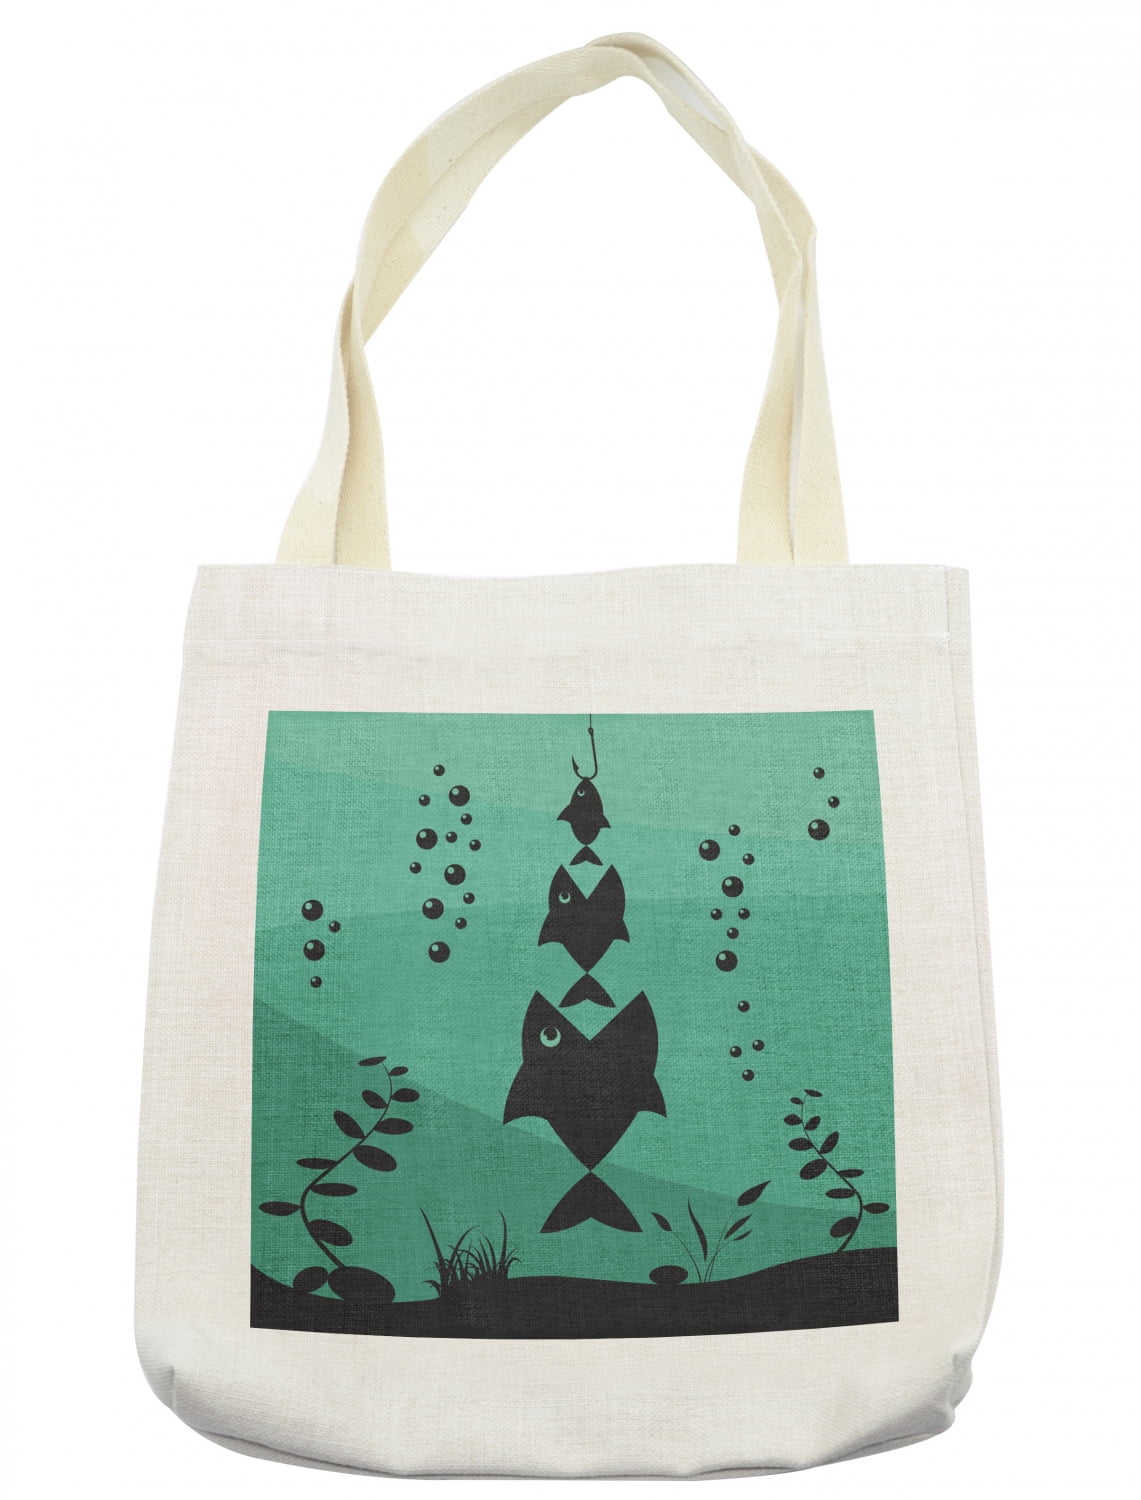 Fishing Tote Bag, Big Fish Eats Little Small in Bubbles Underwater ...